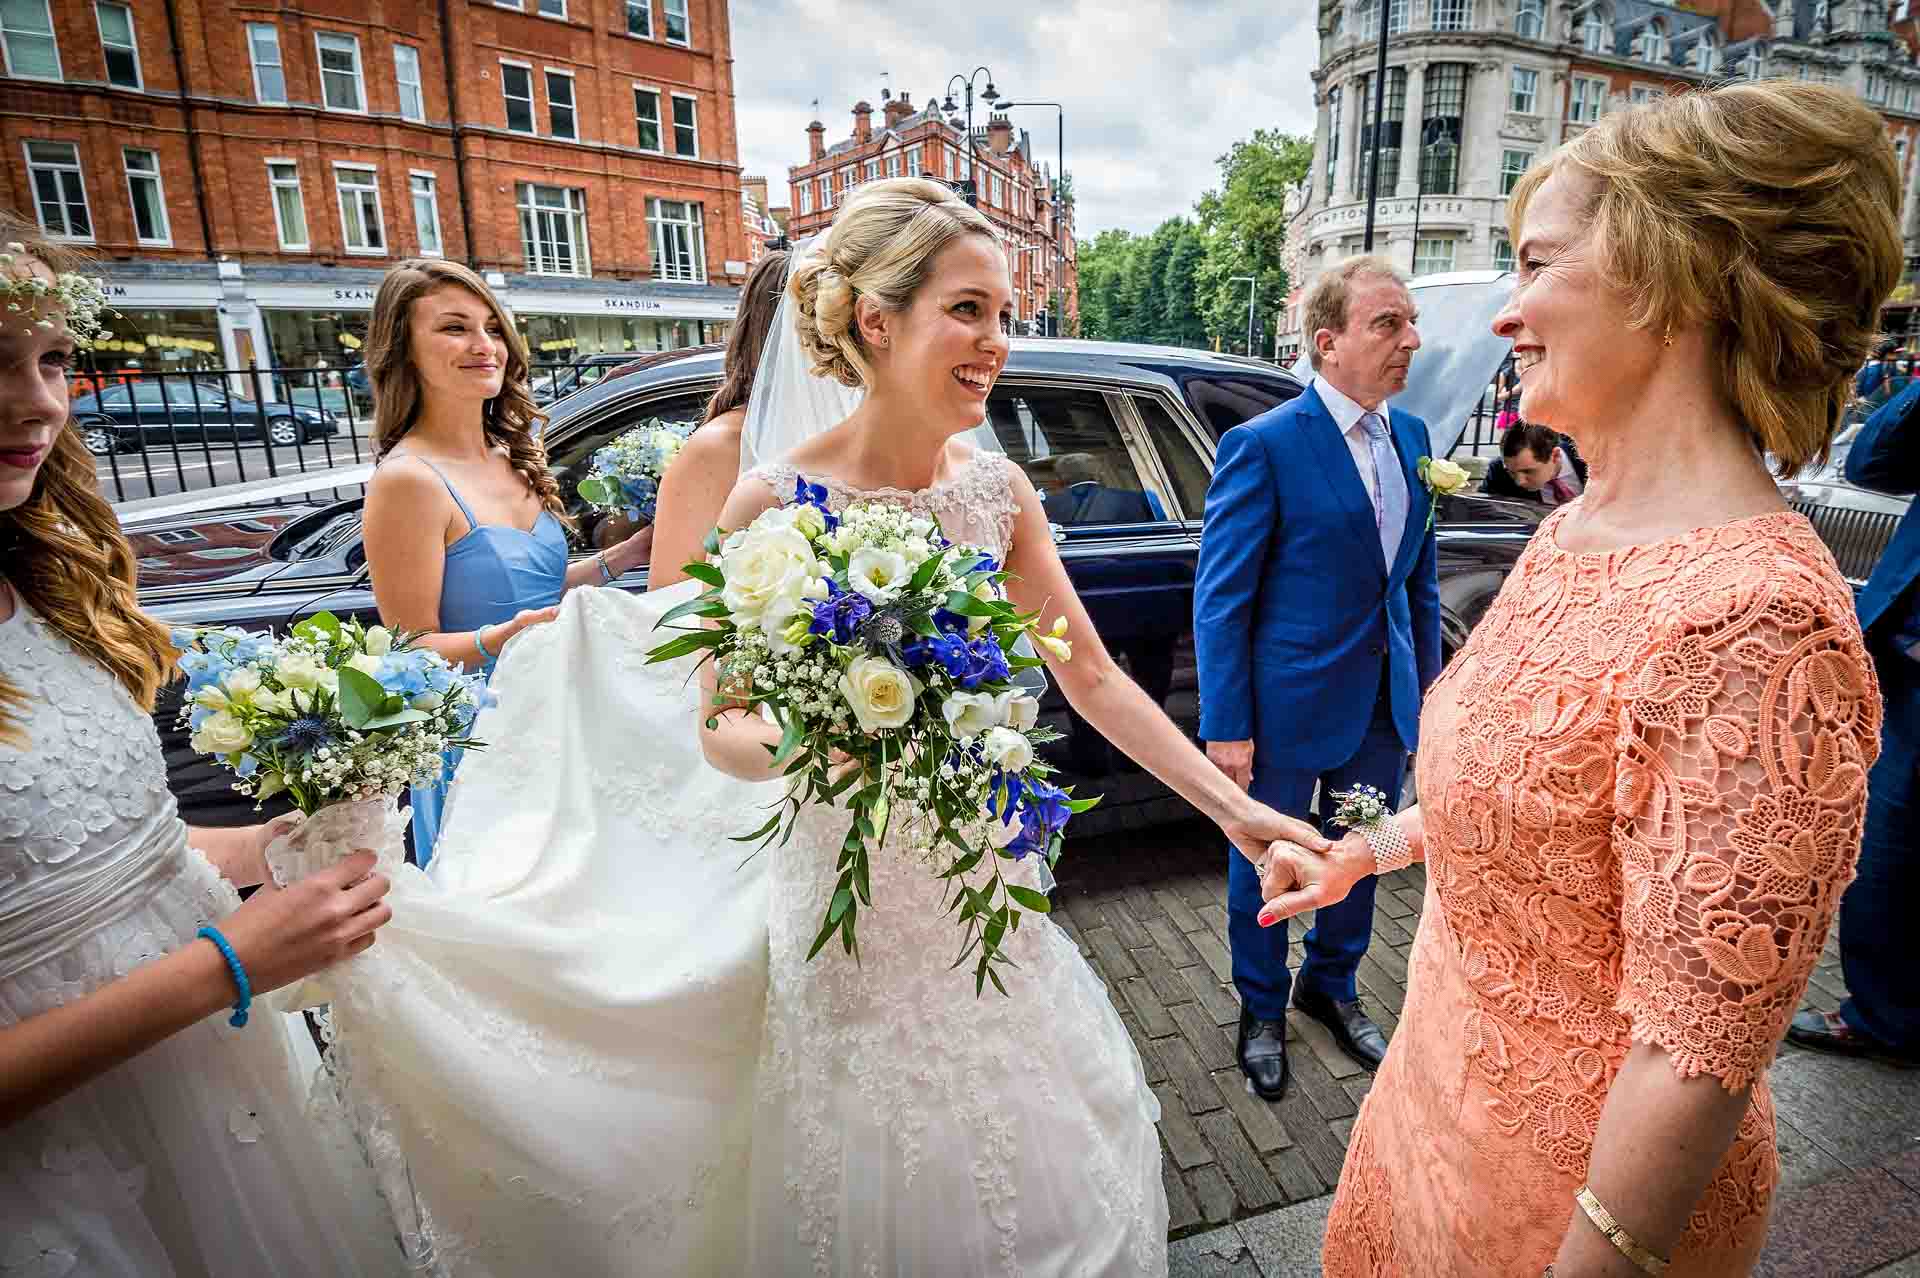 Arrival of the Bride at Brompton Oratory